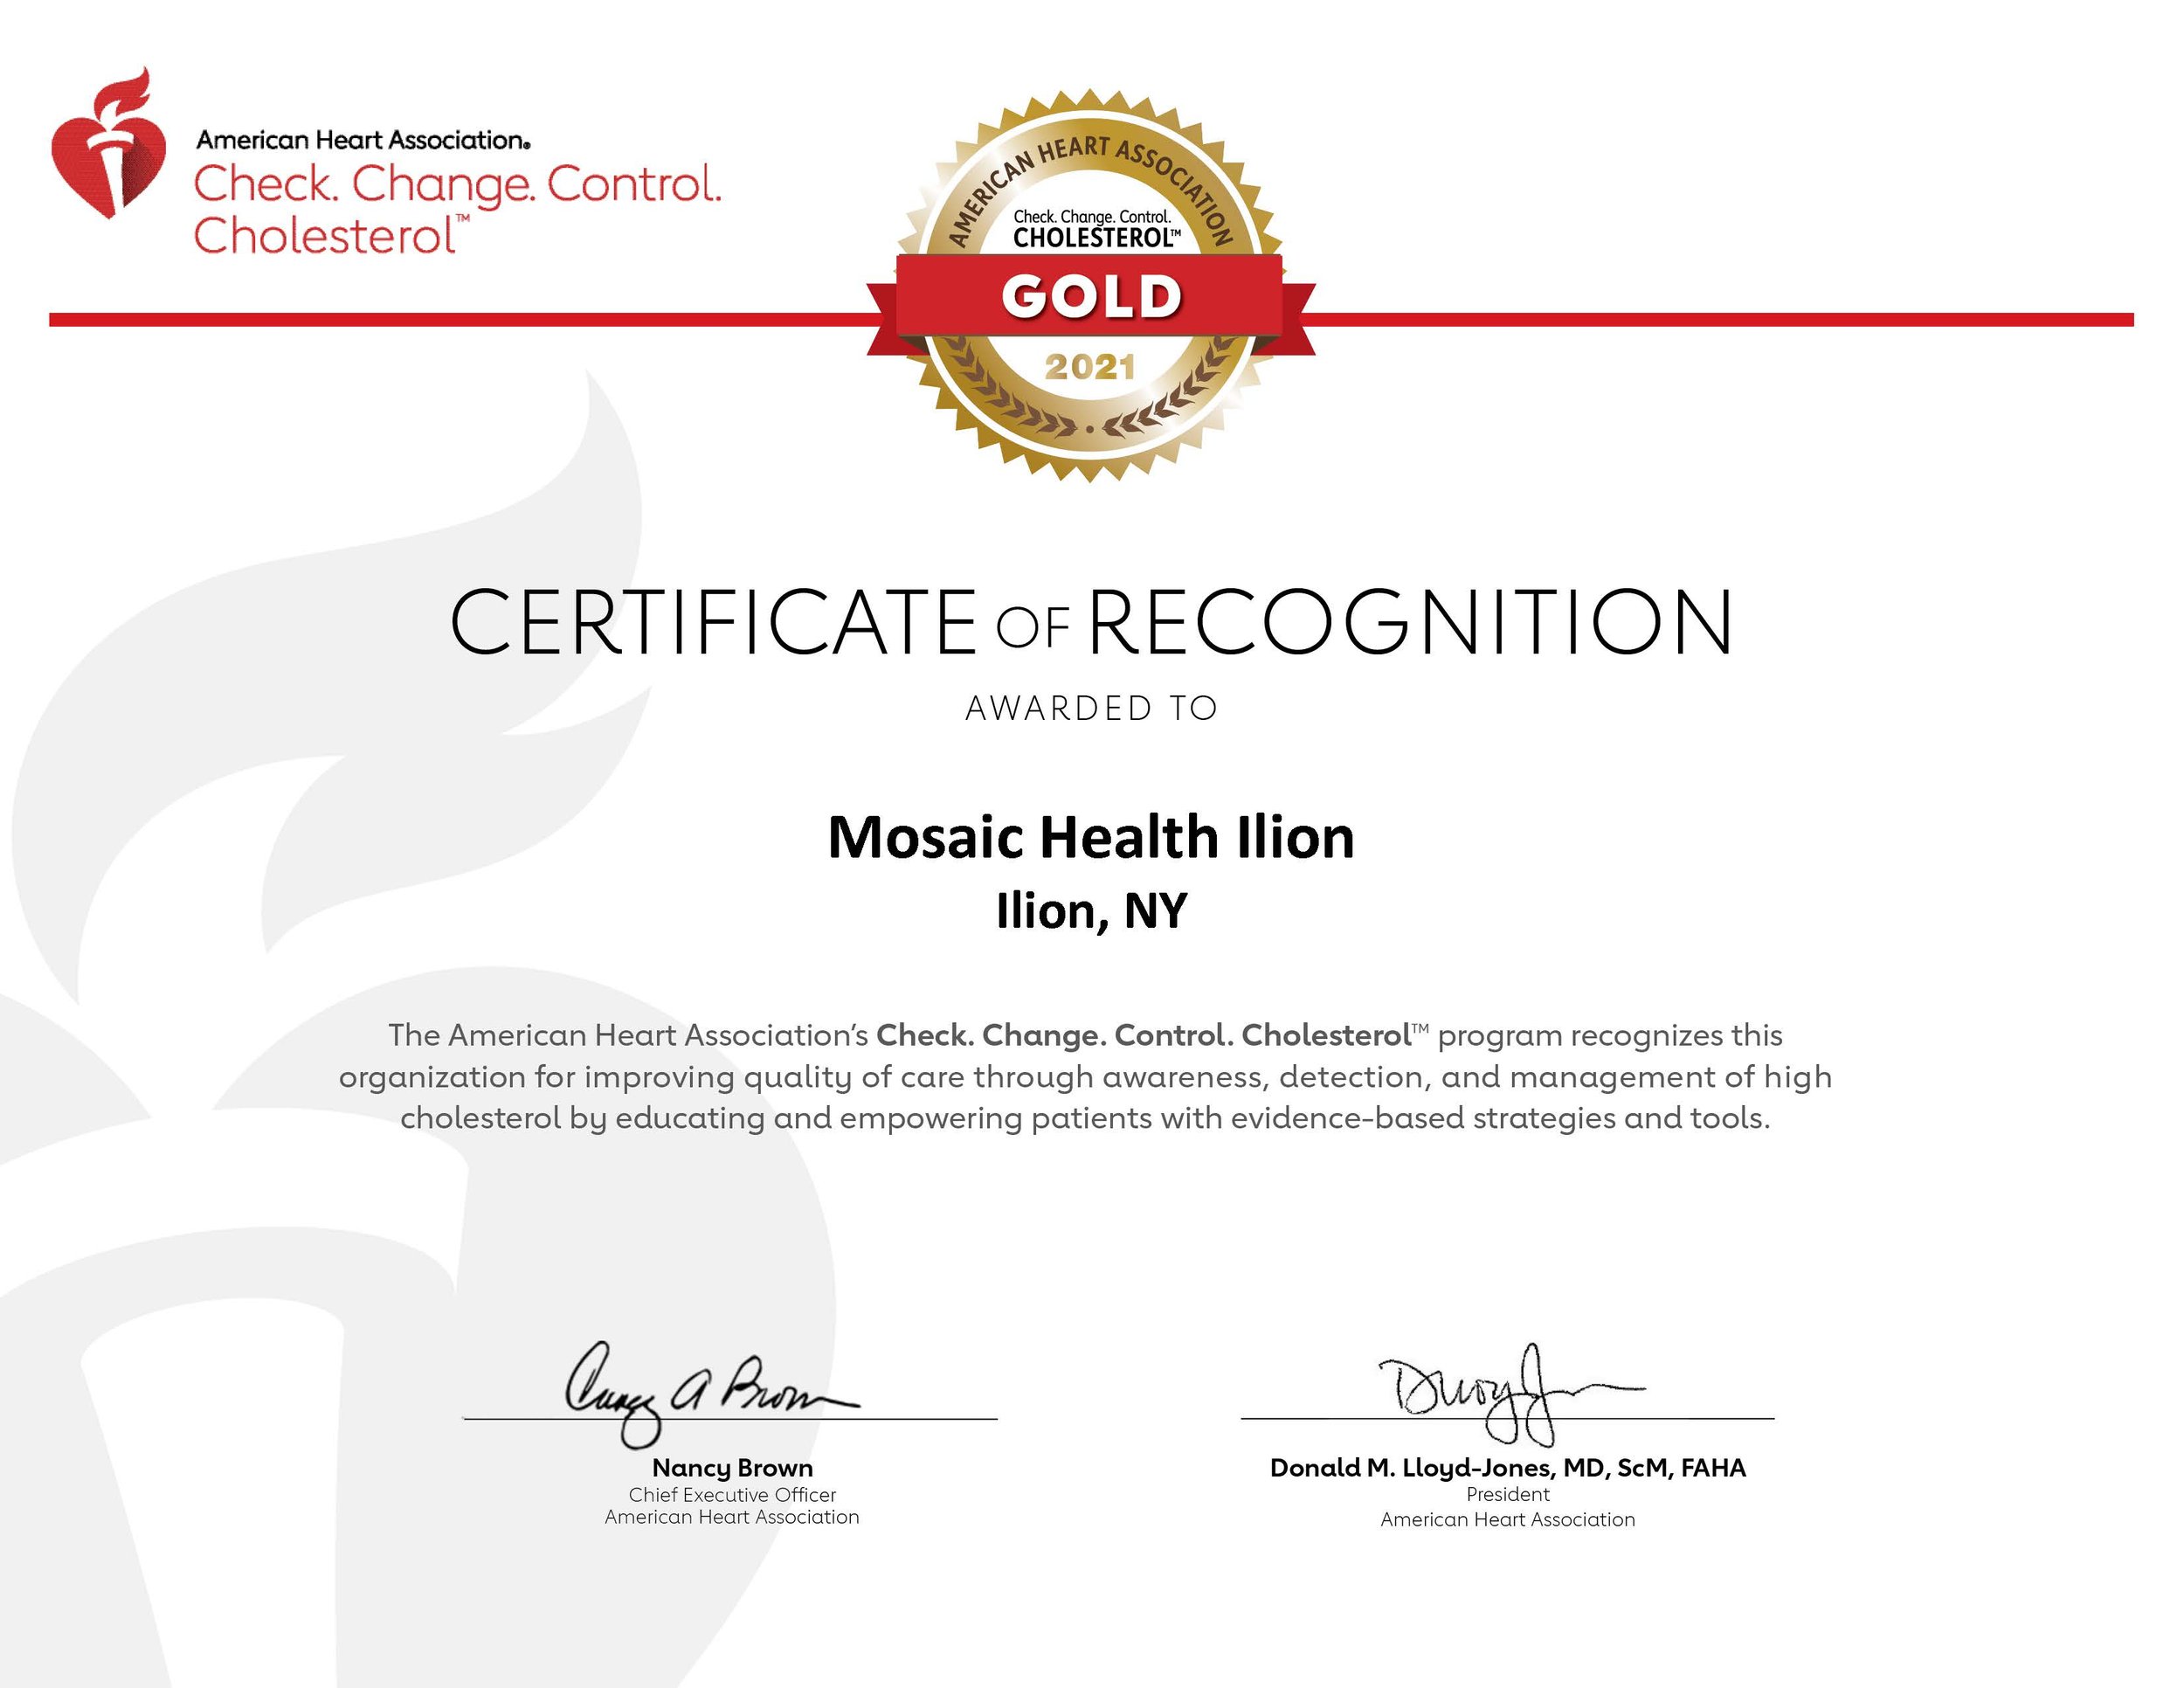 CCCC_CERTIFICATE_GOLD 2021 - Mosaic Health Ilion - NY.jpg